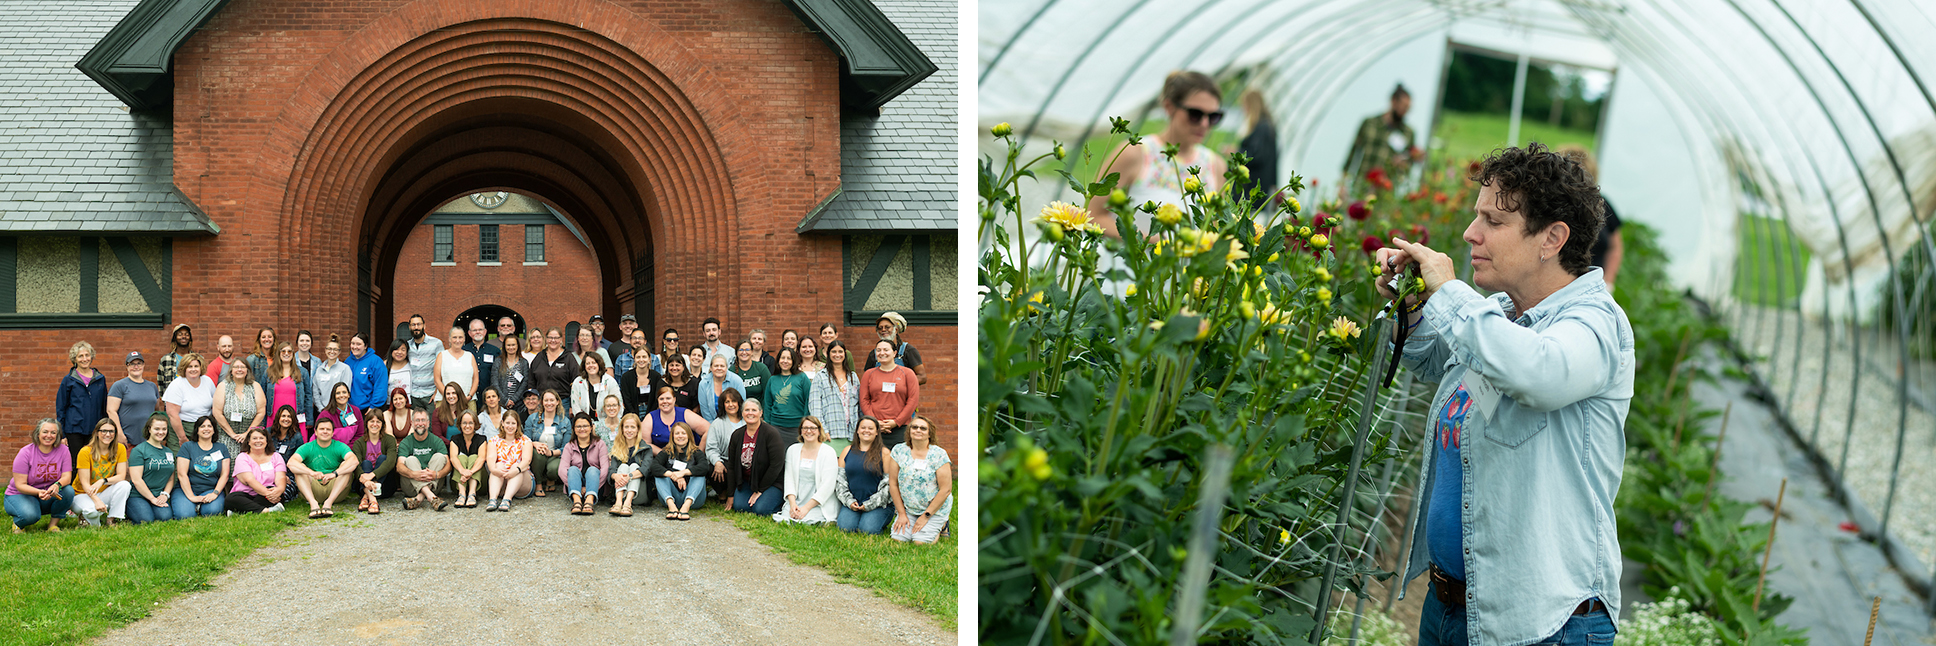 A collage of two images: A large group photo of adults in front of a brick building in summertime, and an adult taking close-up photos of flowers in a greenhouse